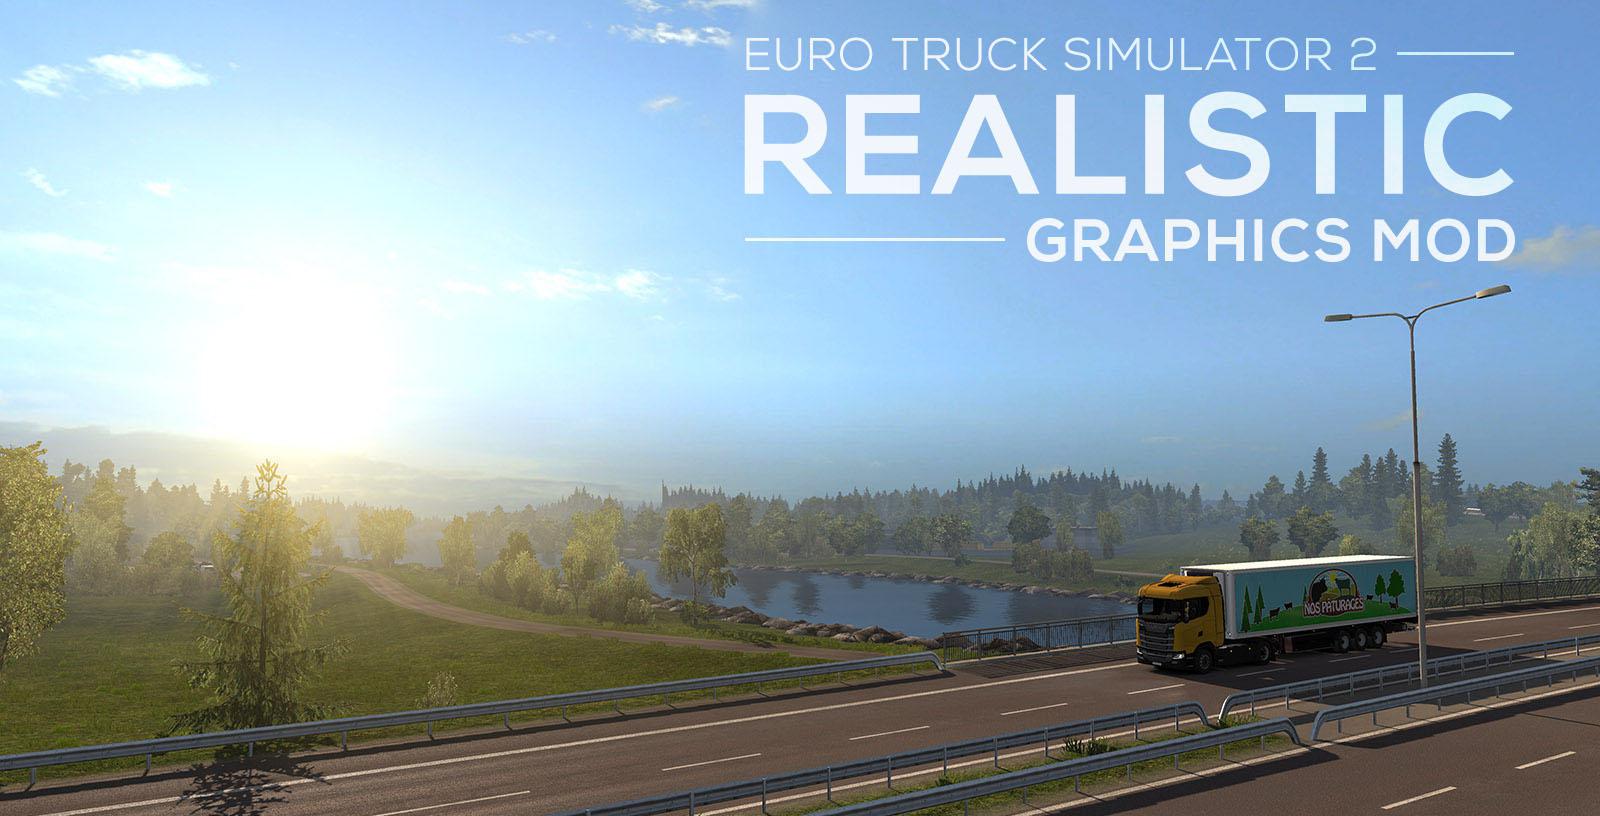 Realistic Graphics Mod V30 By Frkn64 Ets2 Euro Truck Simulator 2 Mods American Truck